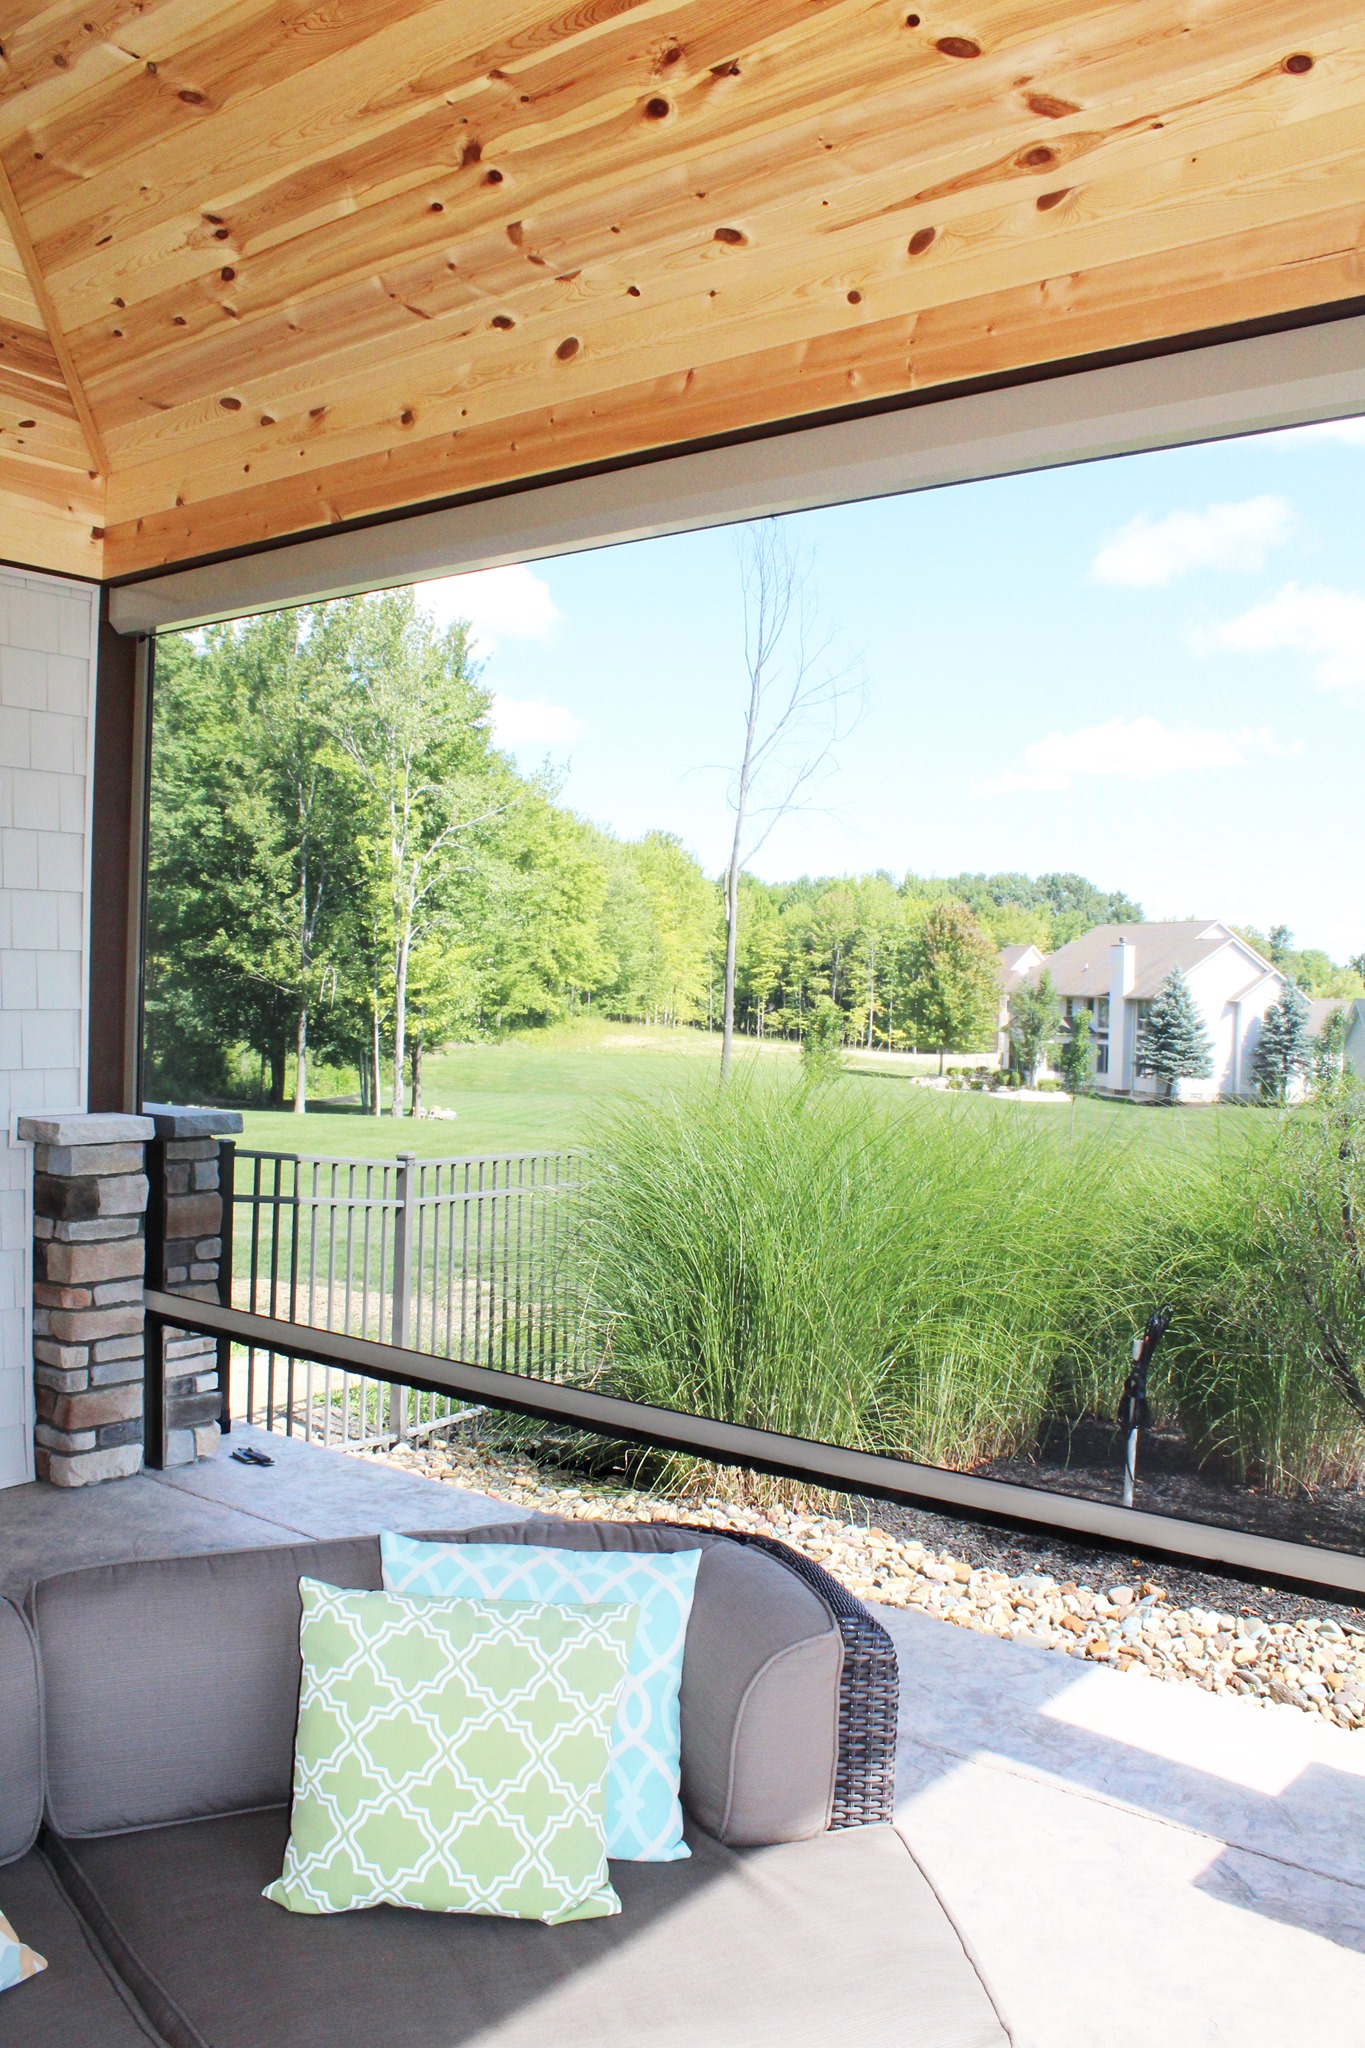 Power Screens Automatically Screen-In Your Patio With The Push of a Button - Automatic power patio screens